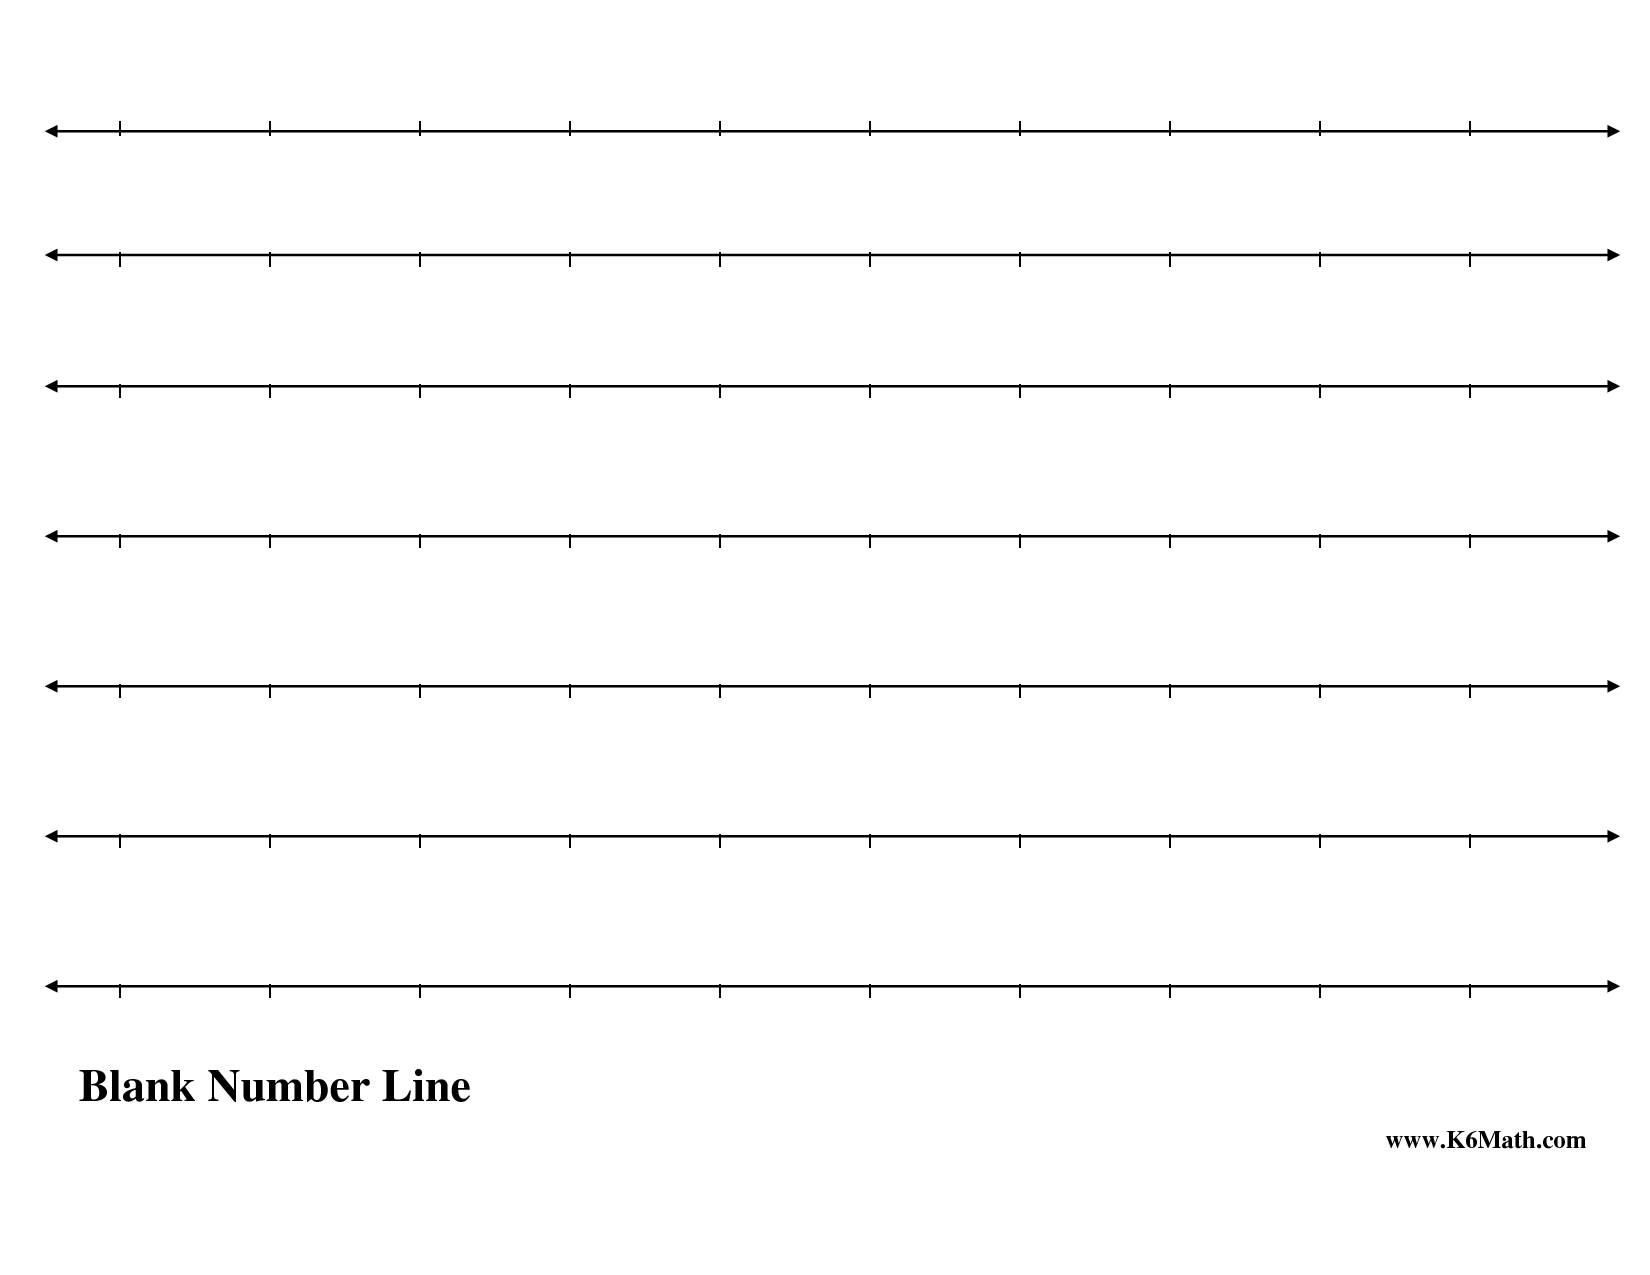 5-best-images-of-free-printable-number-line-worksheets-printable-blank-number-line-worksheet